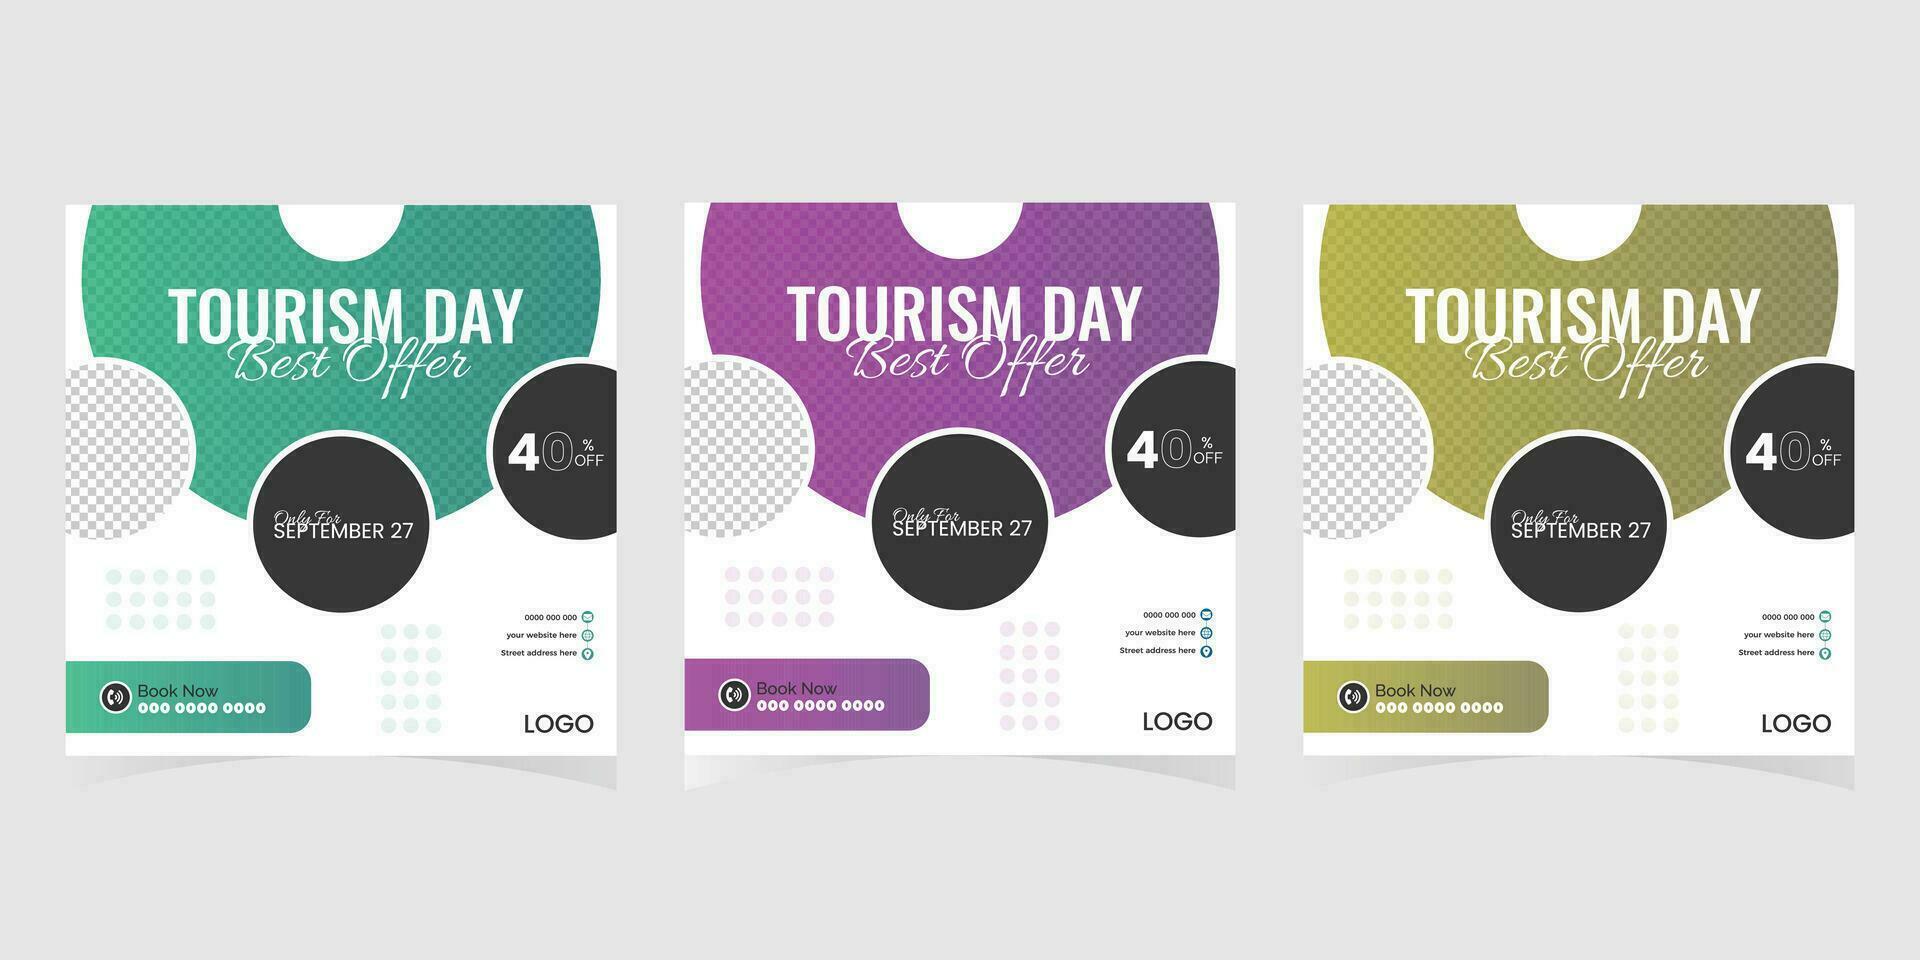 Simple and Clean World Tourism Day Social Media Post Design Template vector